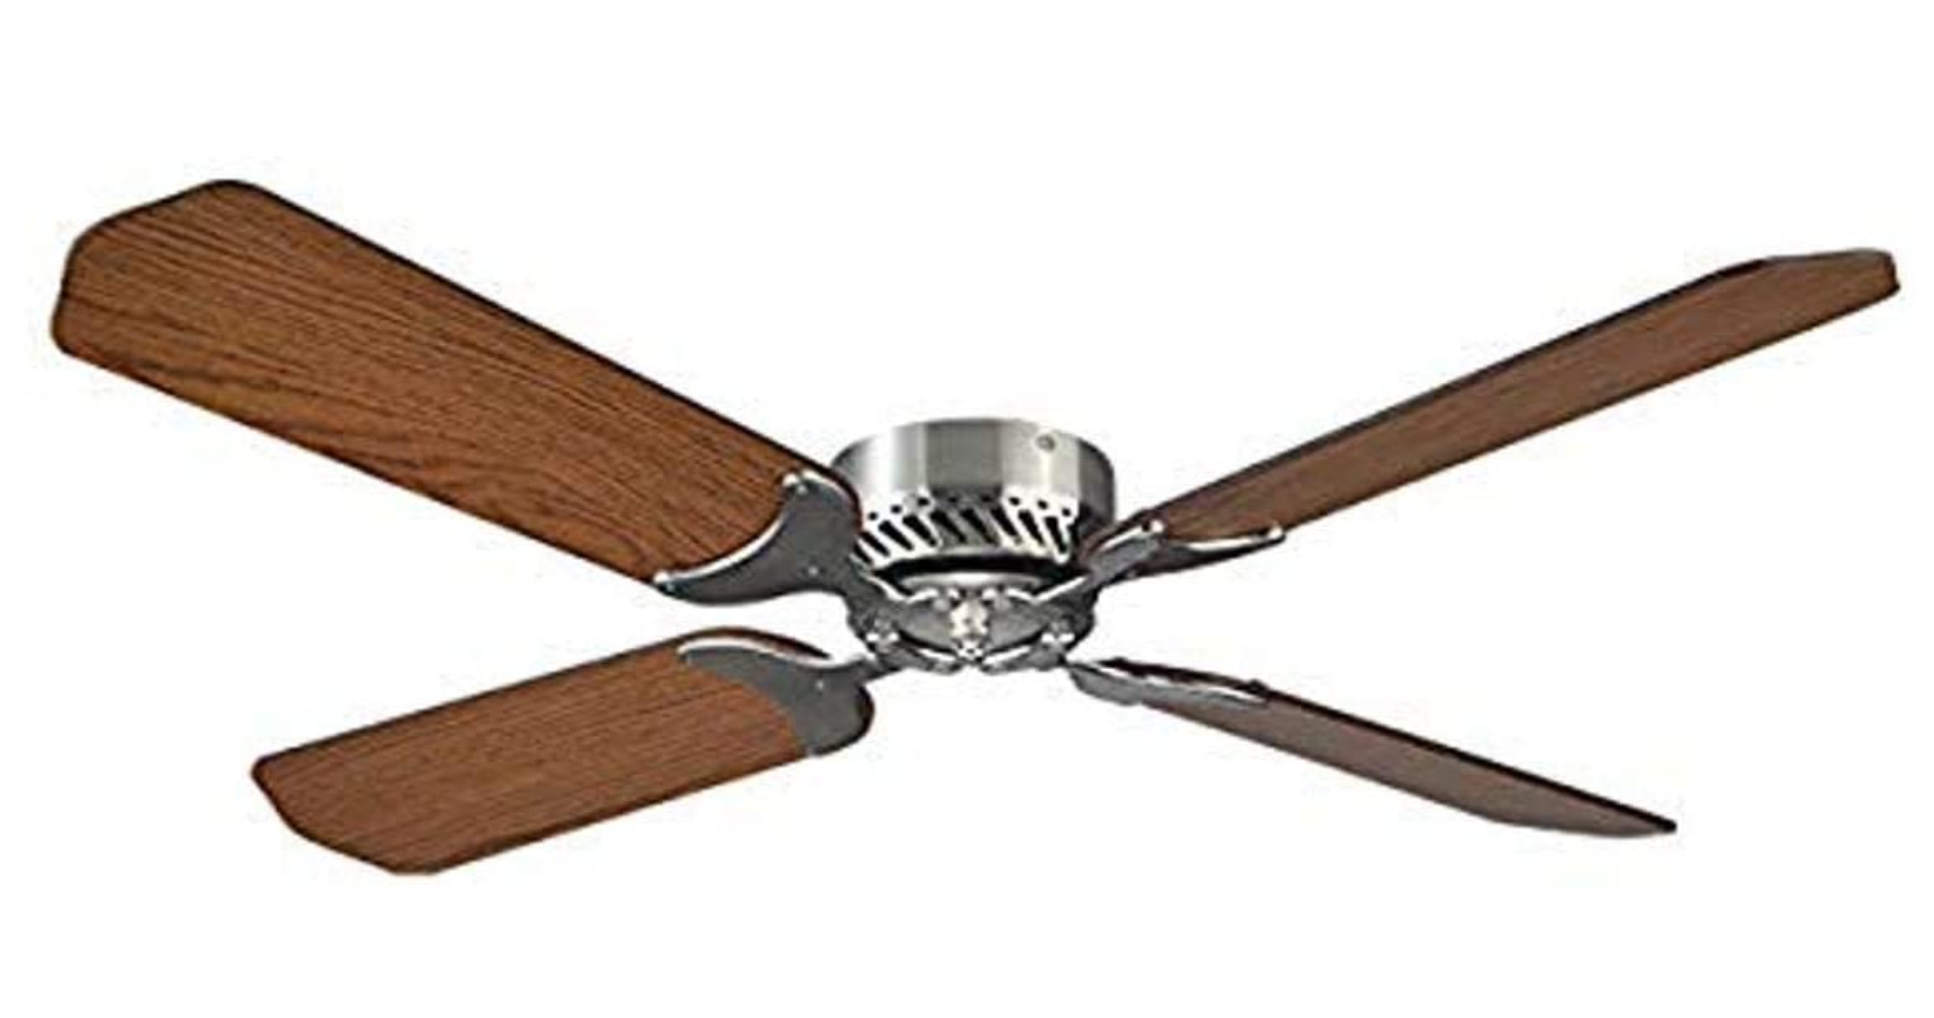 4 Best 12v Ceiling Fans Review In 2023 Importance And Buying Guide